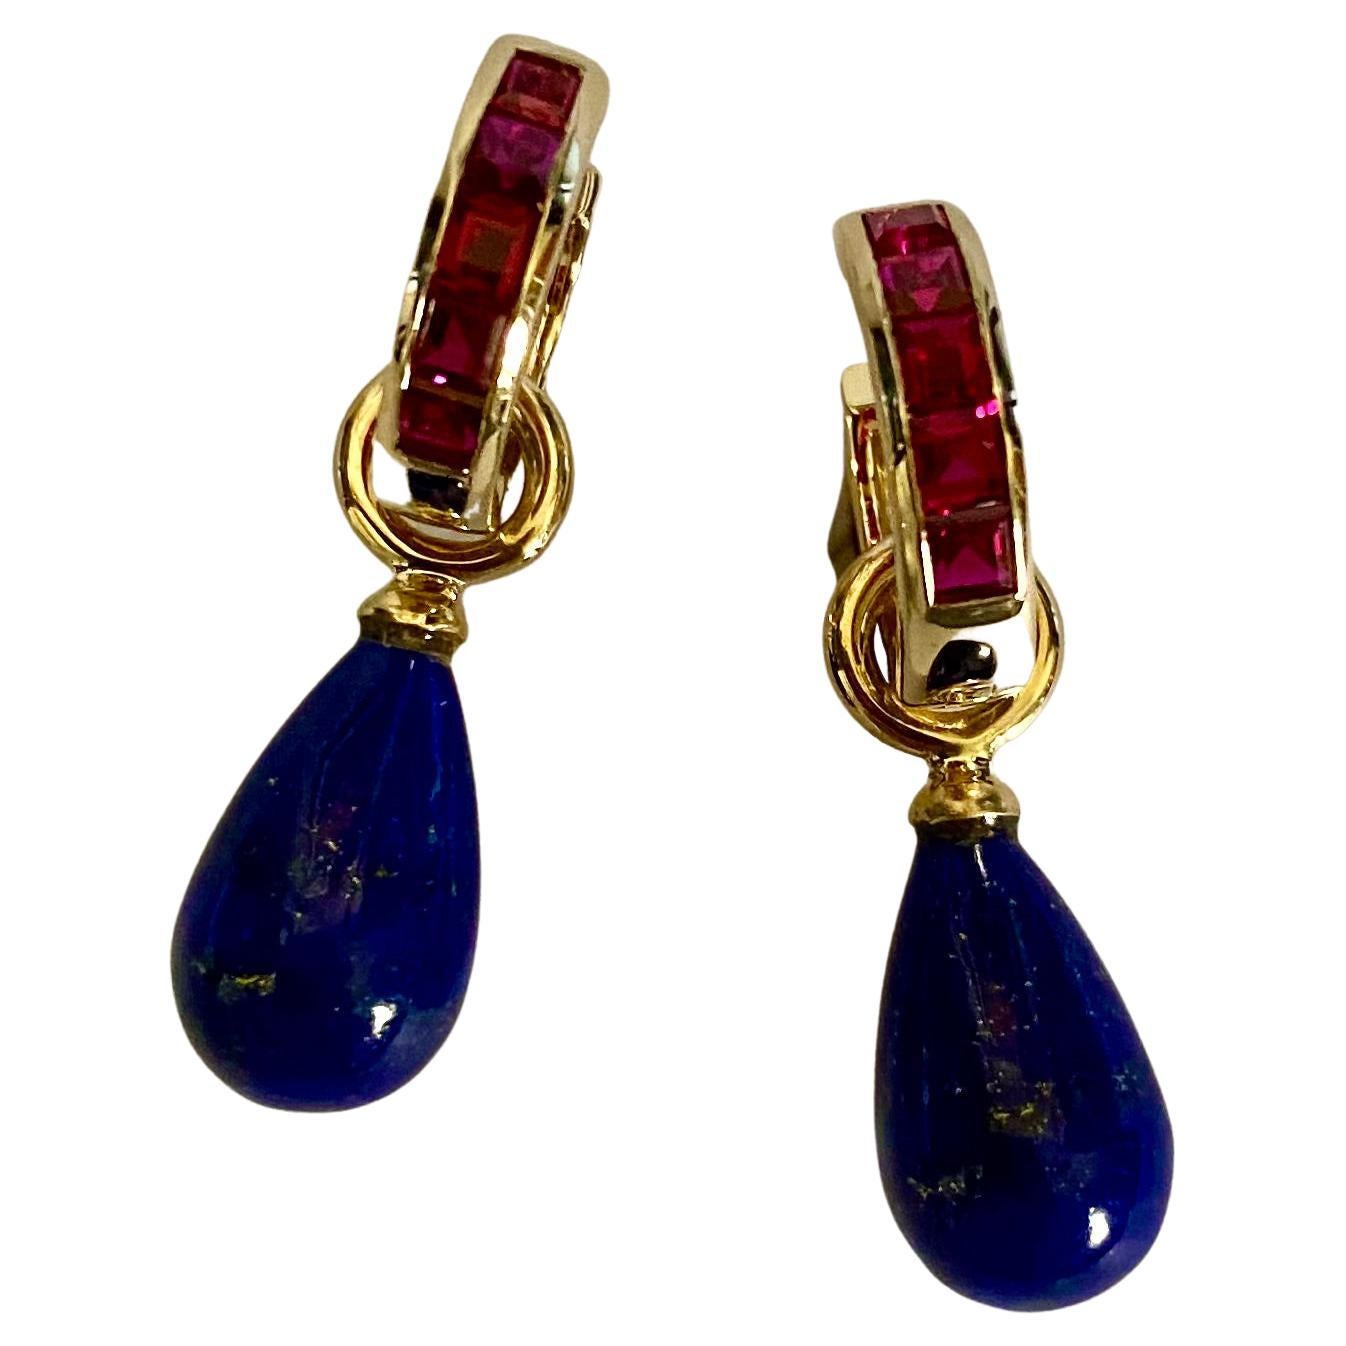 Lapis Lazuli are featured in these sophisticated drop earrings.  The lapis have beautiful golden flecks, are well cut and polished to a mirror like finish.  They dangle from huggie style hoops channel set with bright red rubies.  The drops are